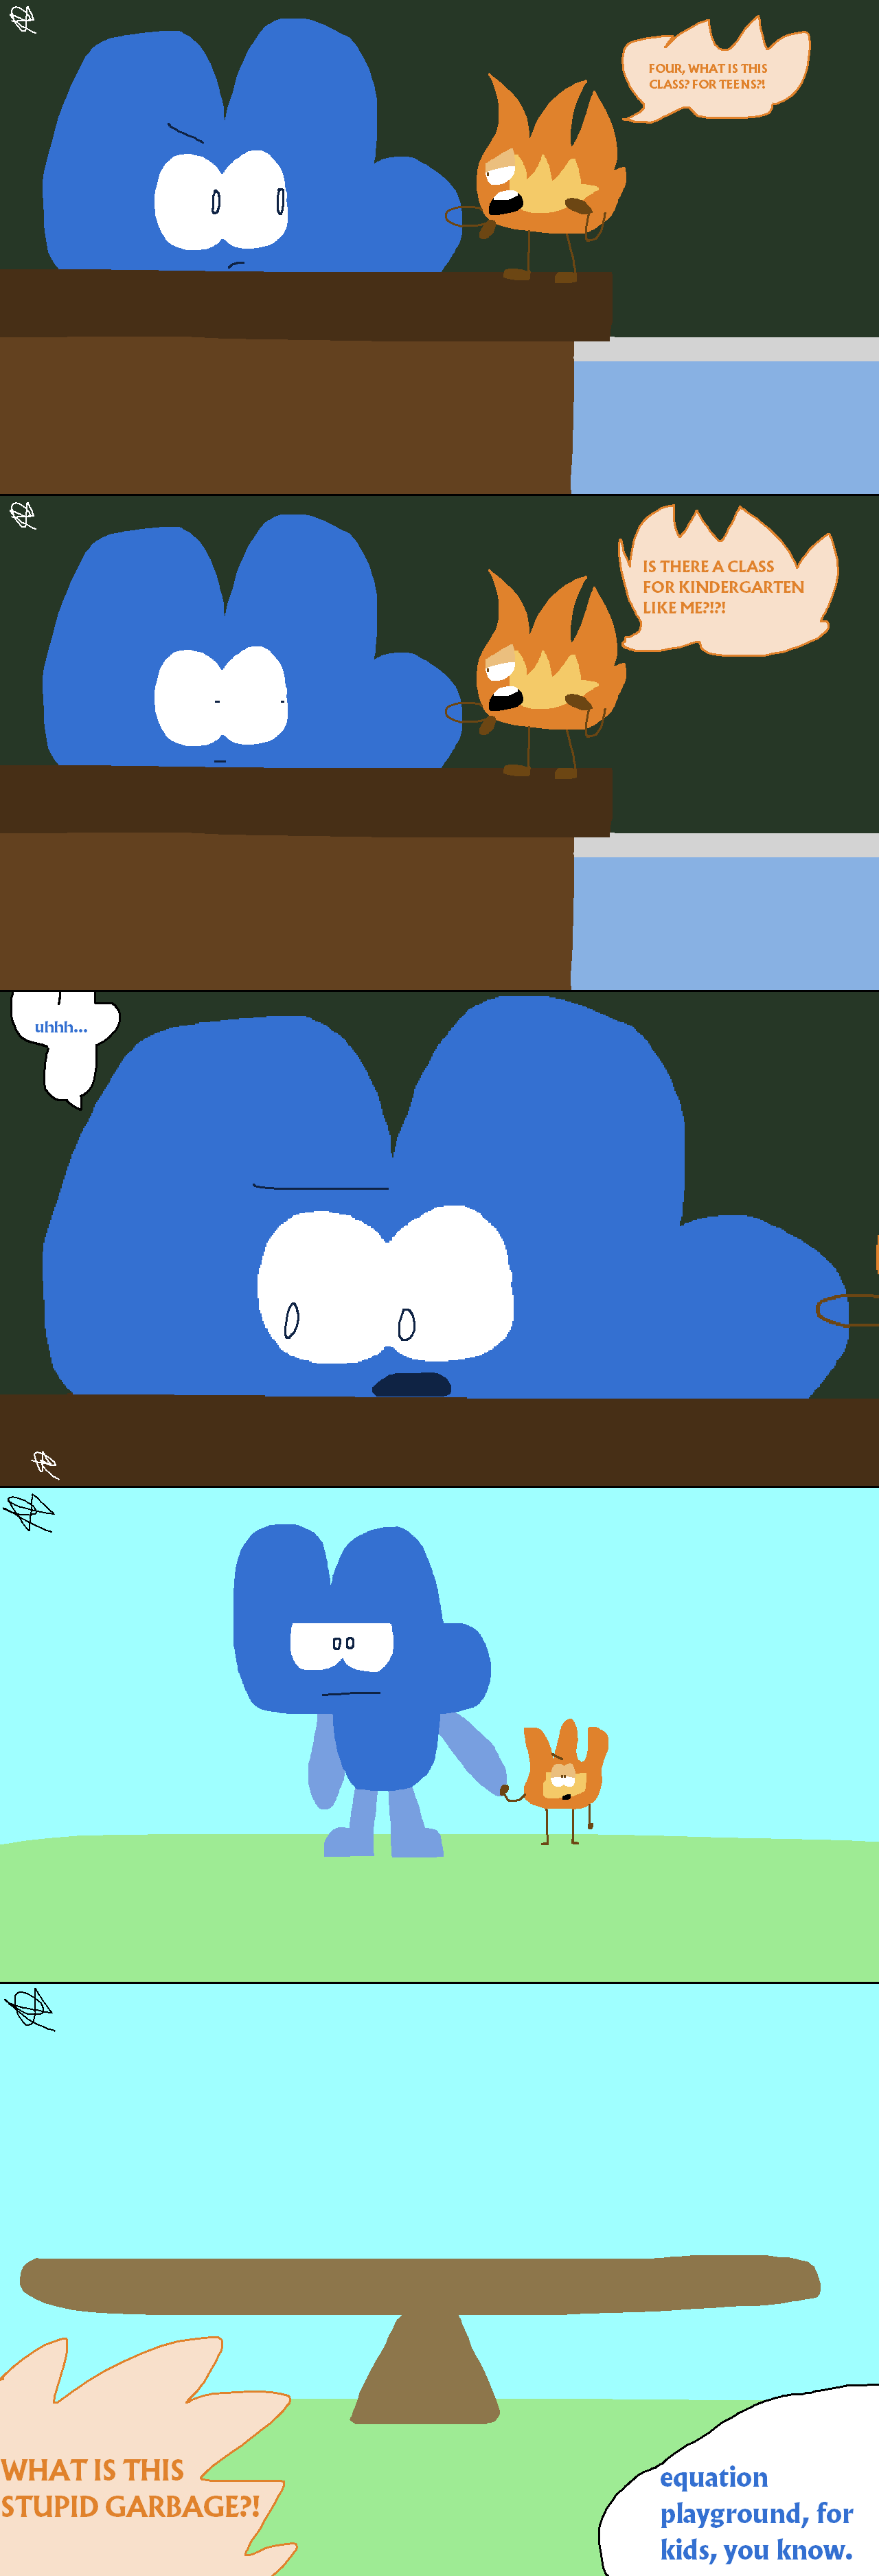 the BFDI assets r petty fun to mess with - Comic Studio